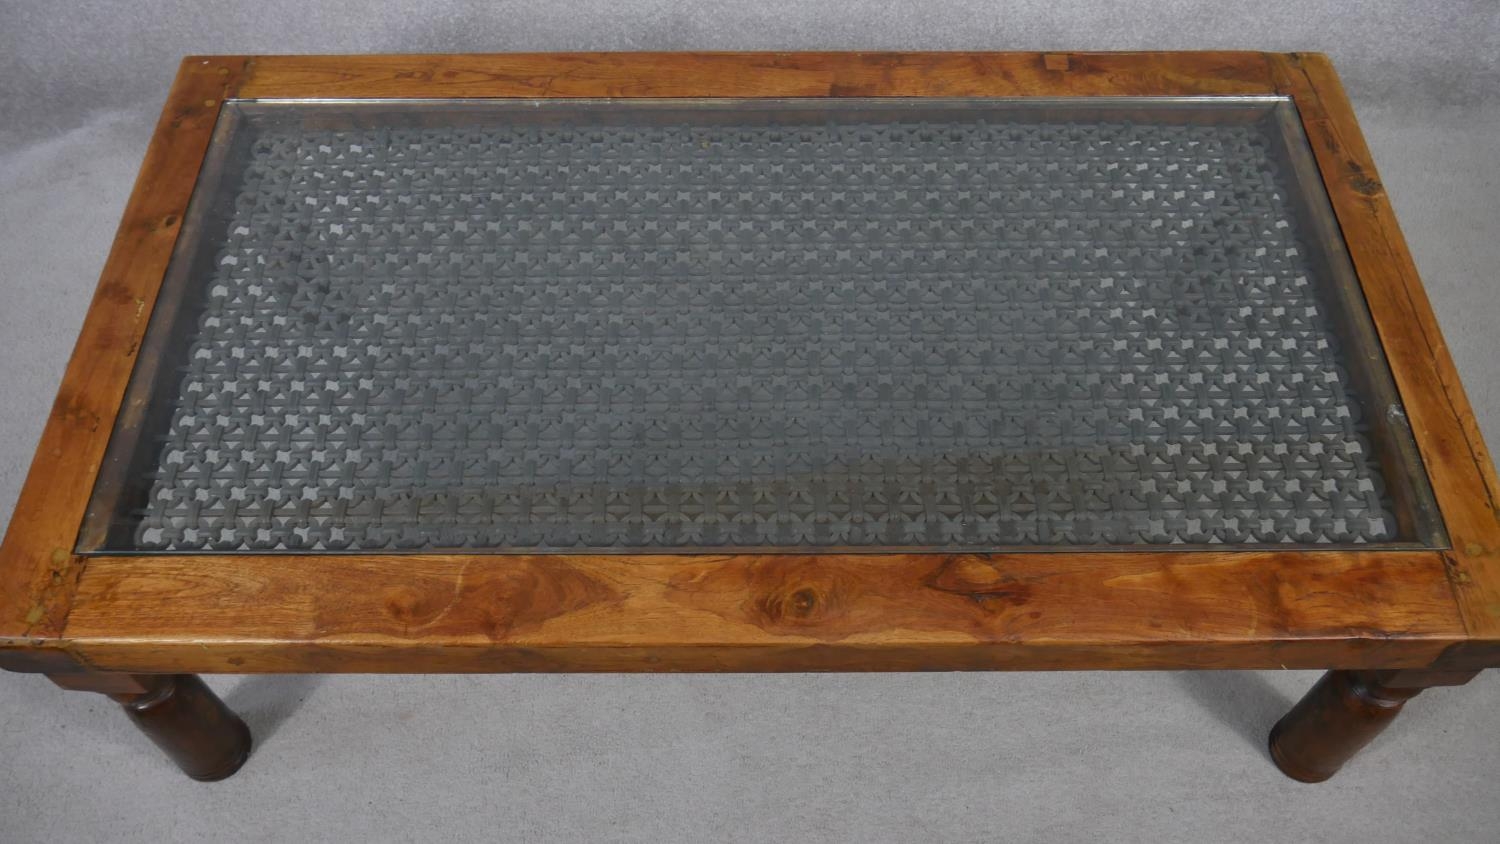 An Indian hardwood coffee table with plate glass on a metal lattice work inset top. H.41 L.132 W. - Image 2 of 5